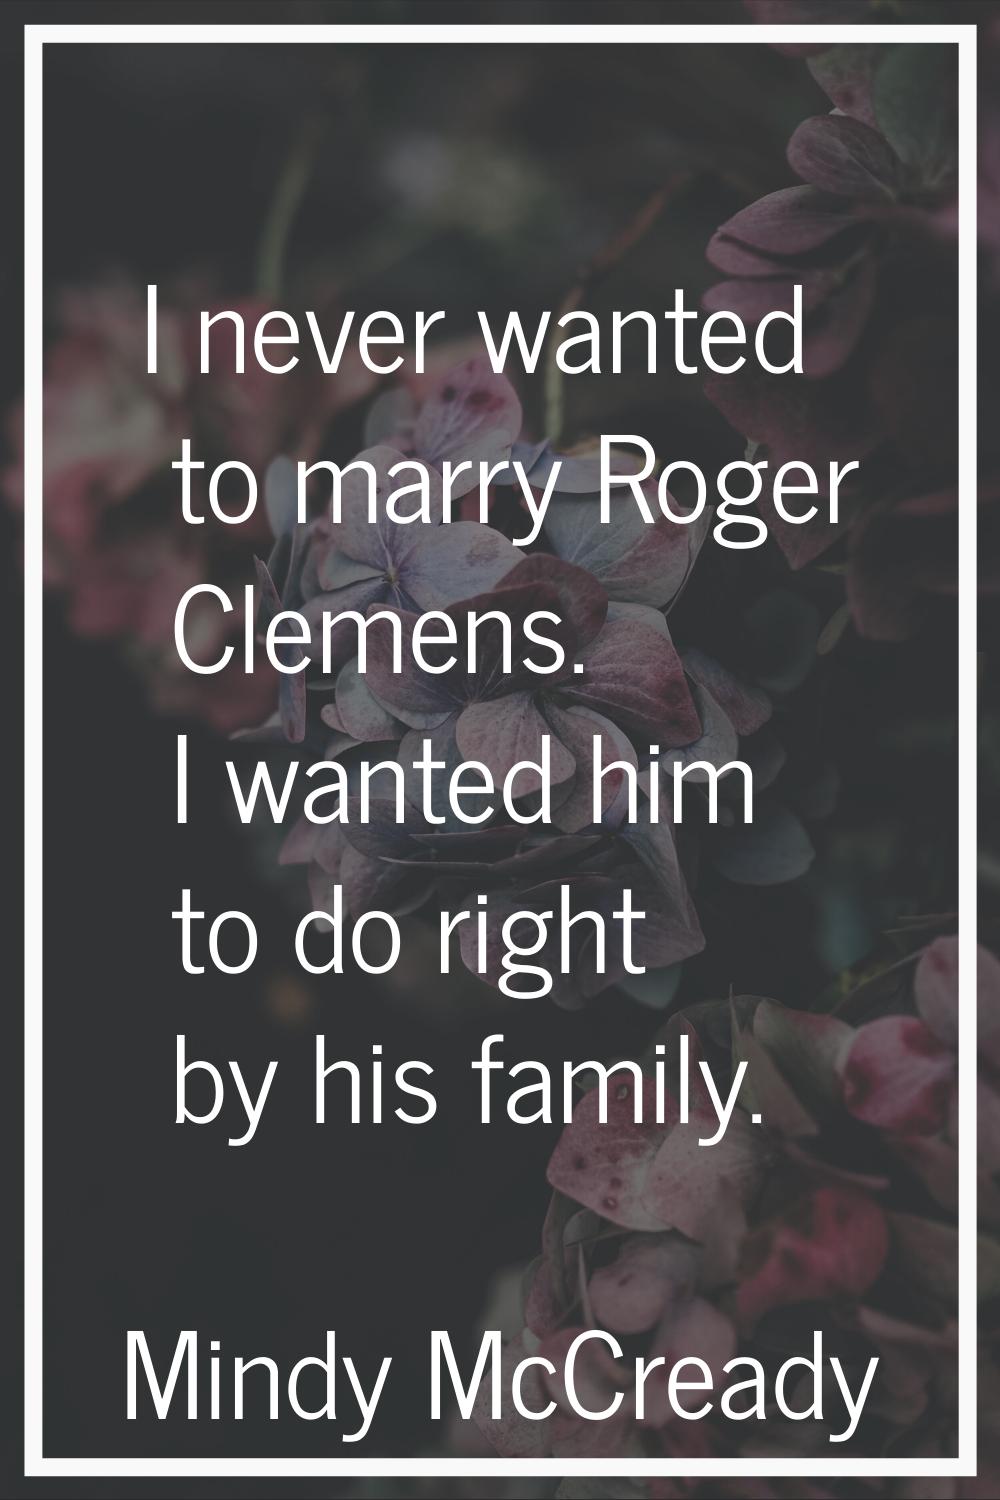 I never wanted to marry Roger Clemens. I wanted him to do right by his family.